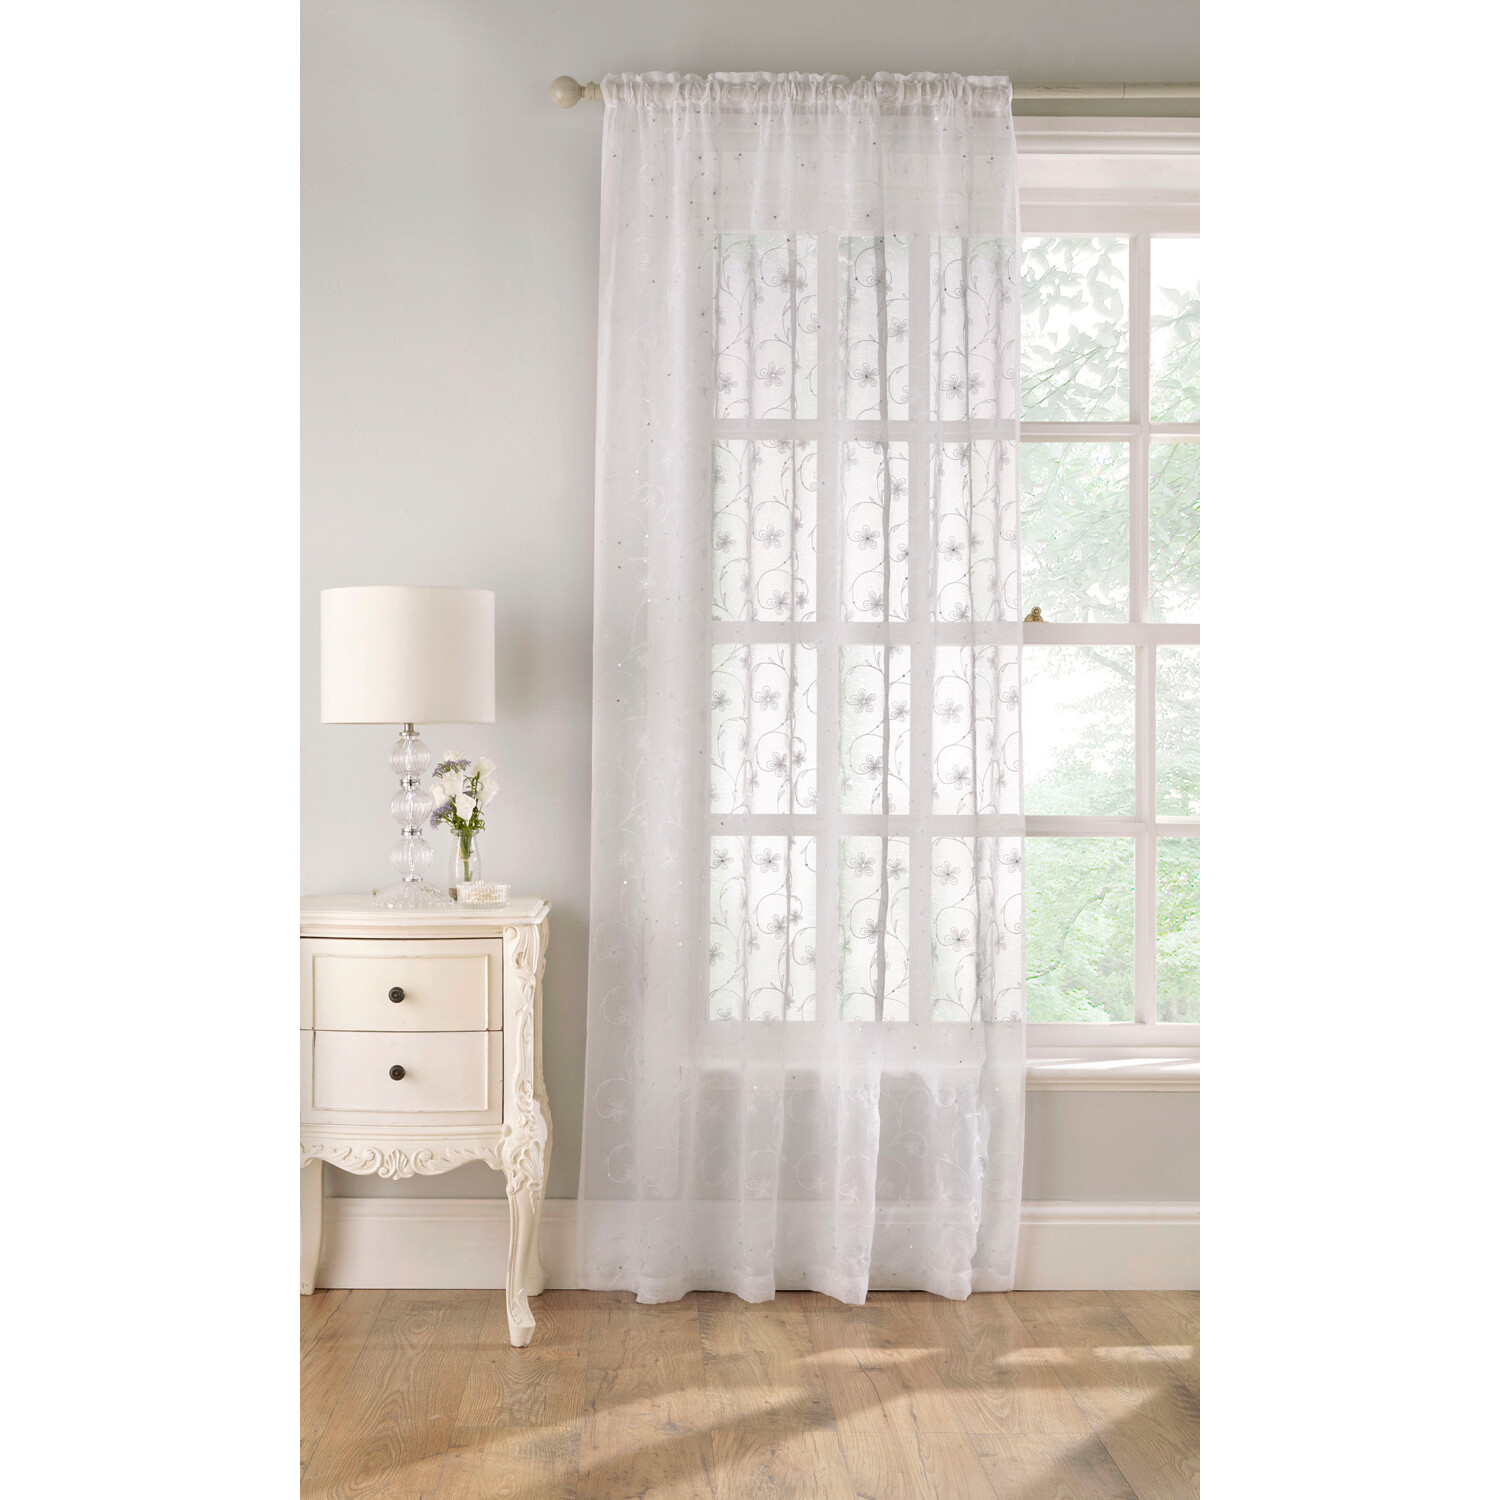 Belle White Embroidered Panel Voile Curtain 137 x 140cm Image 1